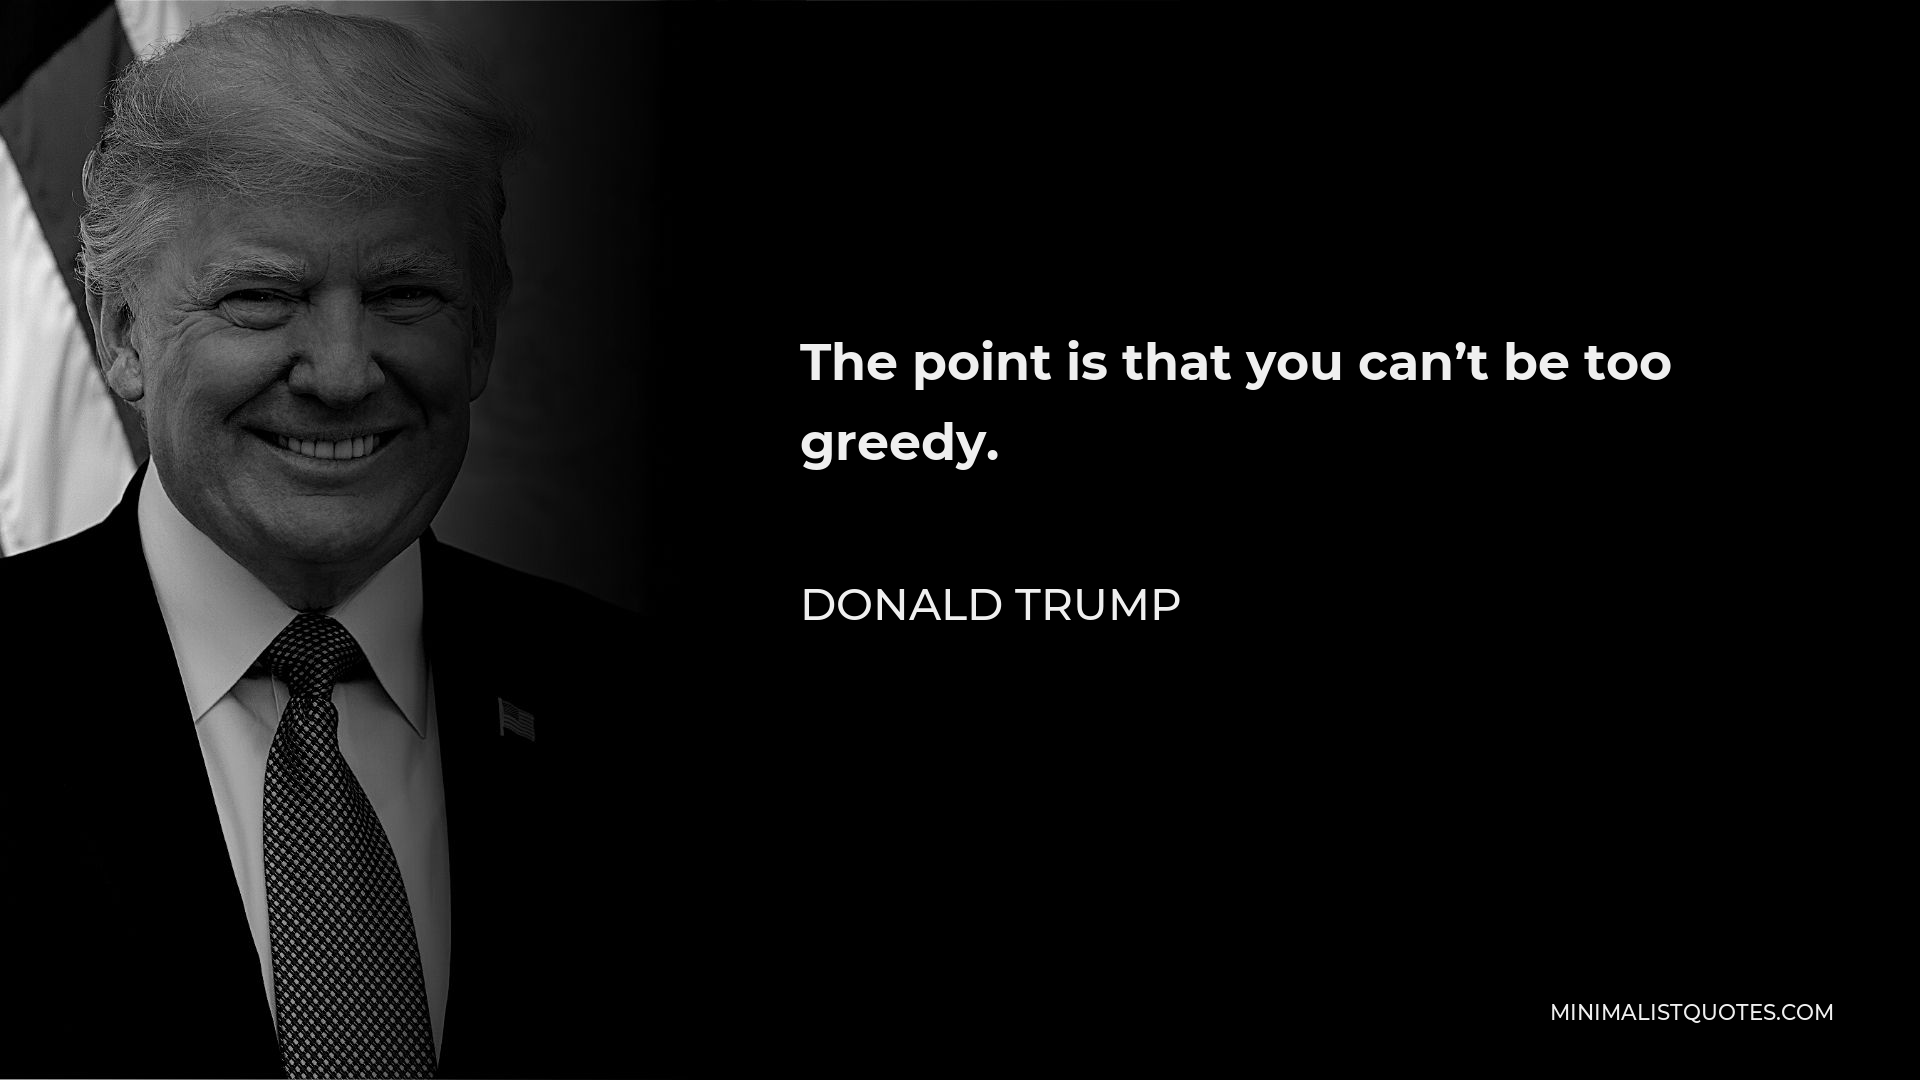 Donald Trump Quote - The point is that you can’t be too greedy.